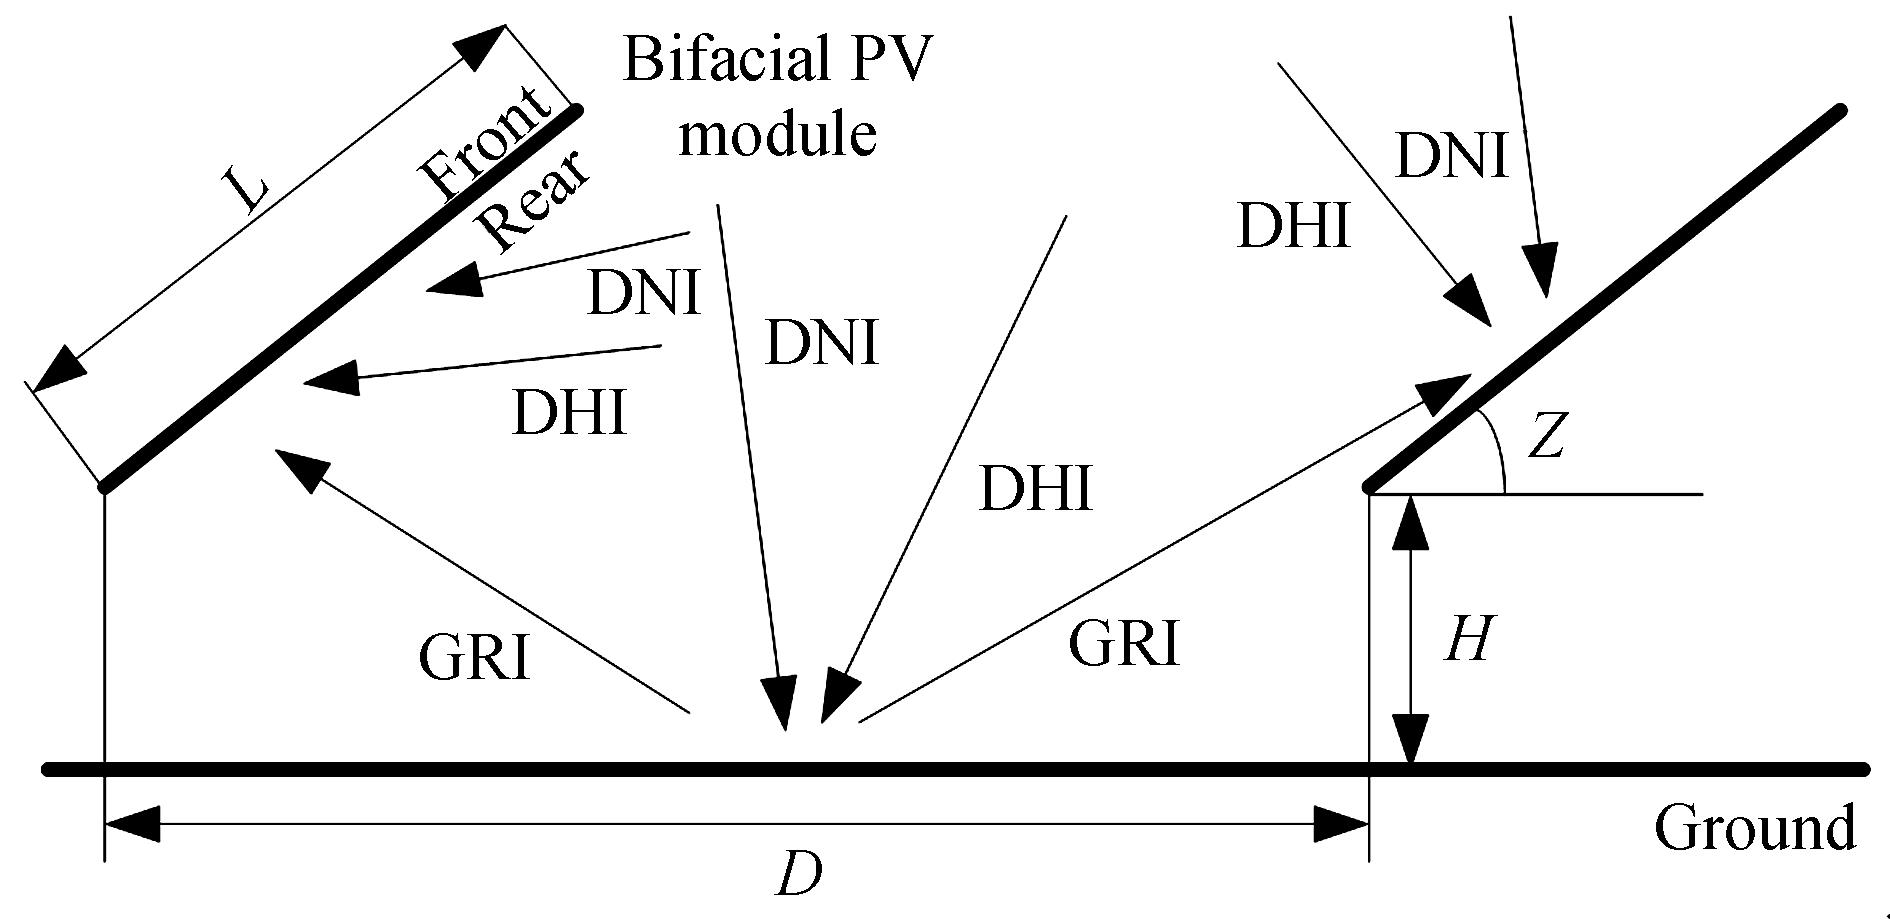 Irradiance models for bifacial photovoltaic